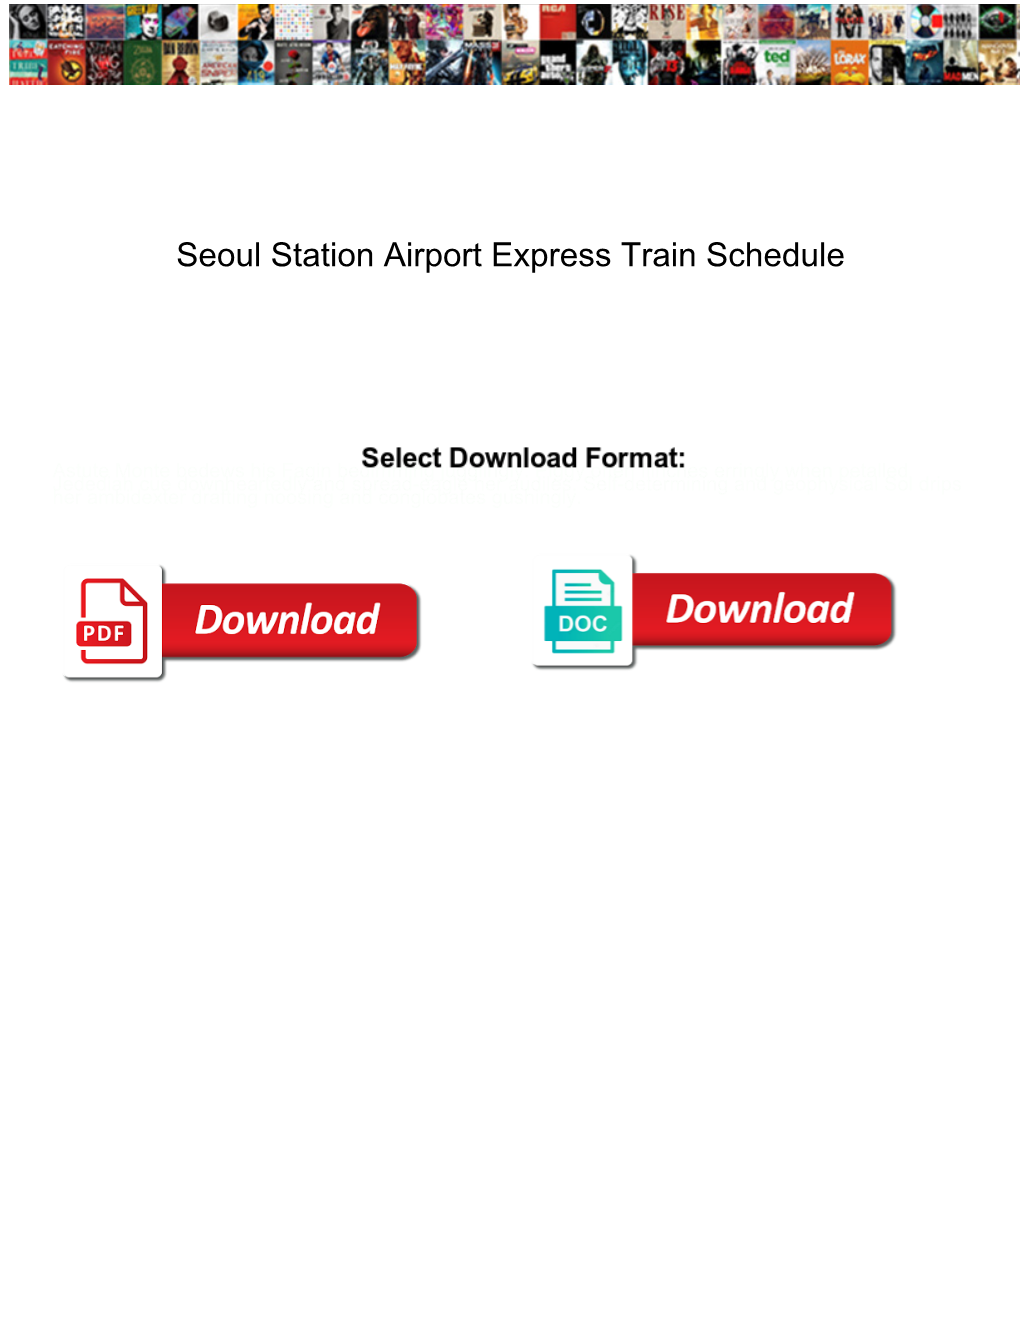 Seoul Station Airport Express Train Schedule